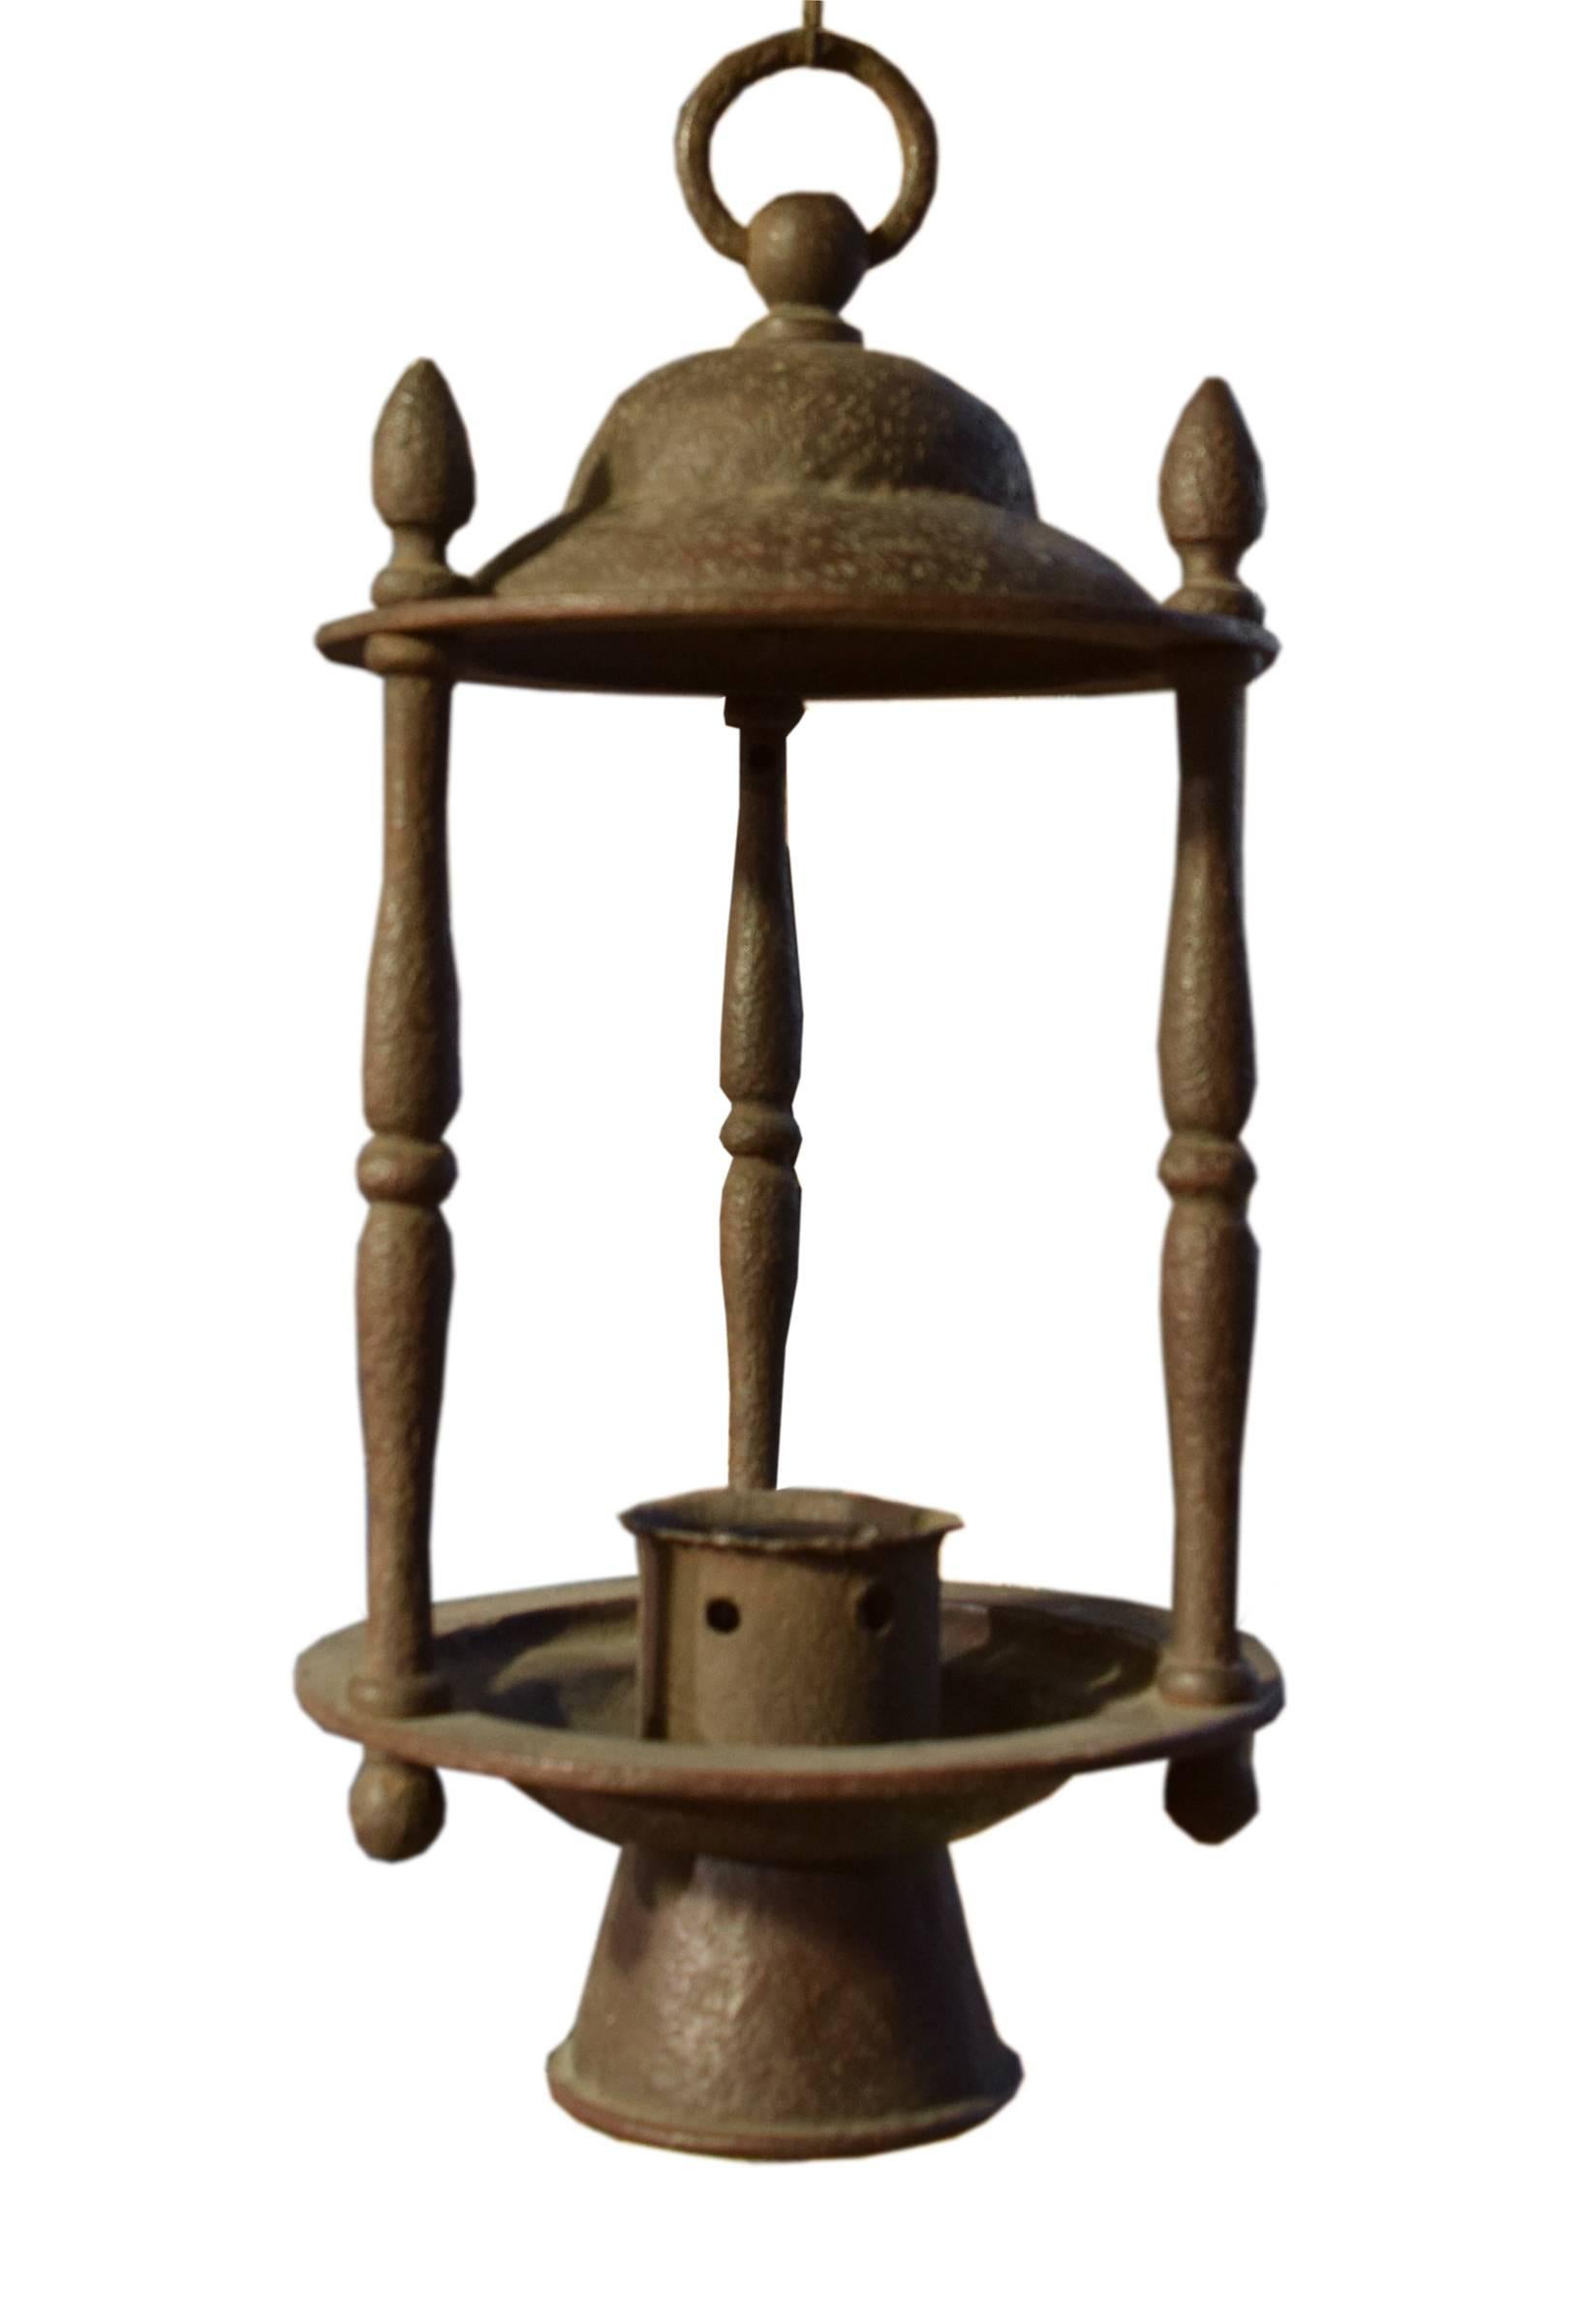 A wrought iron lantern, circa 1930, with a fantastic twisted iron chain from the estate of Jose´ Thenee in Argentina. Thenee is considered one of the greatest blacksmiths and won a world title in 1923.

Measures: 70